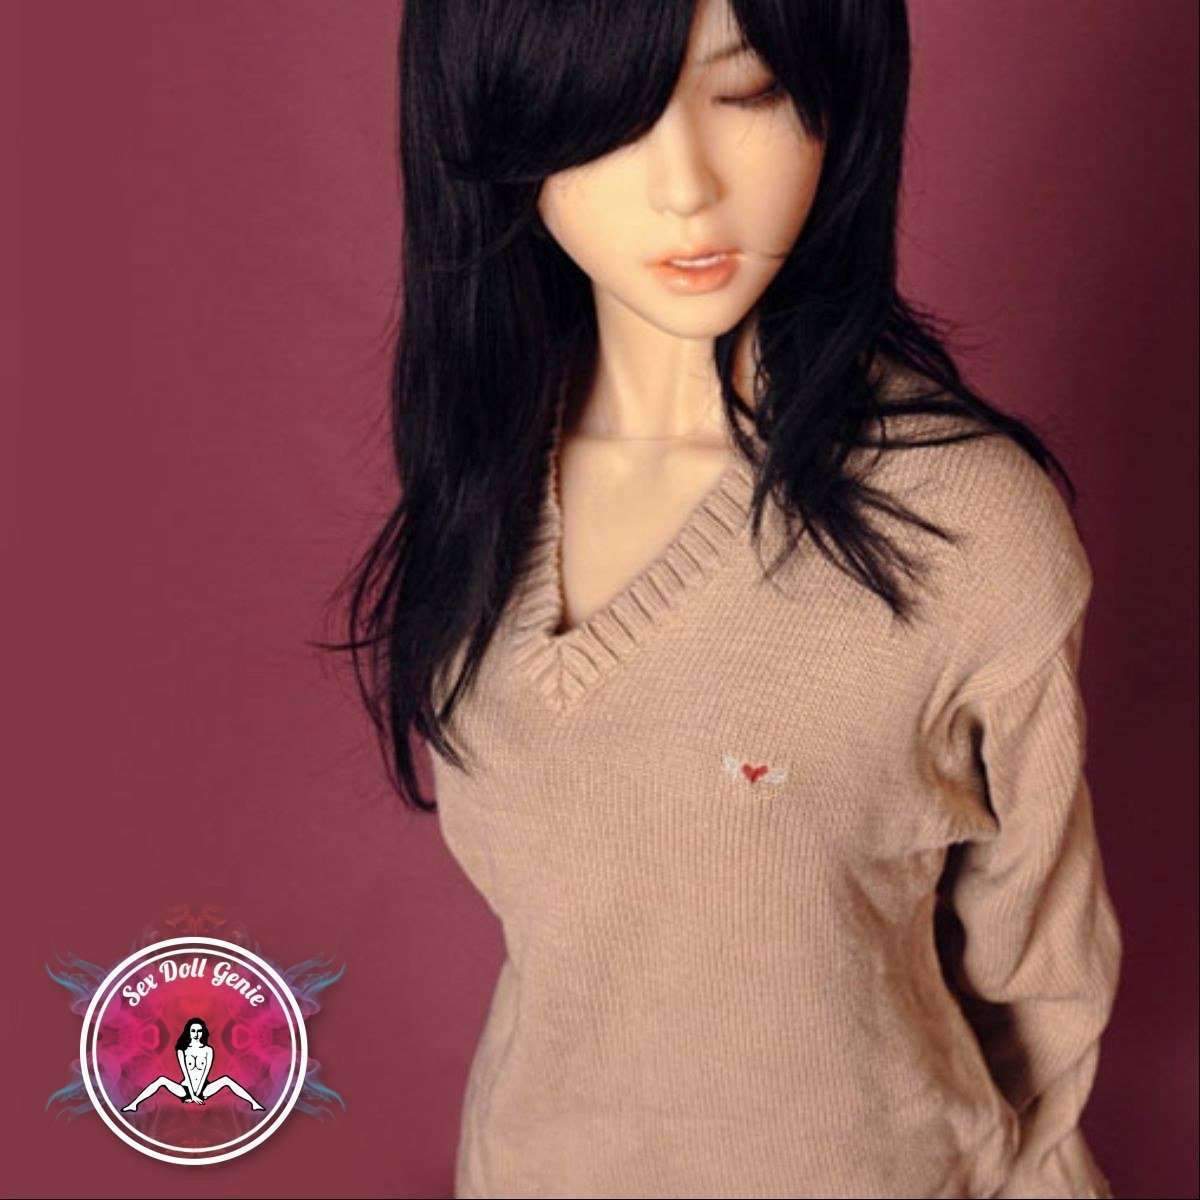 DS Doll - 163 - KaylaCE Head - Type 1 D Cup Silicone Doll-9